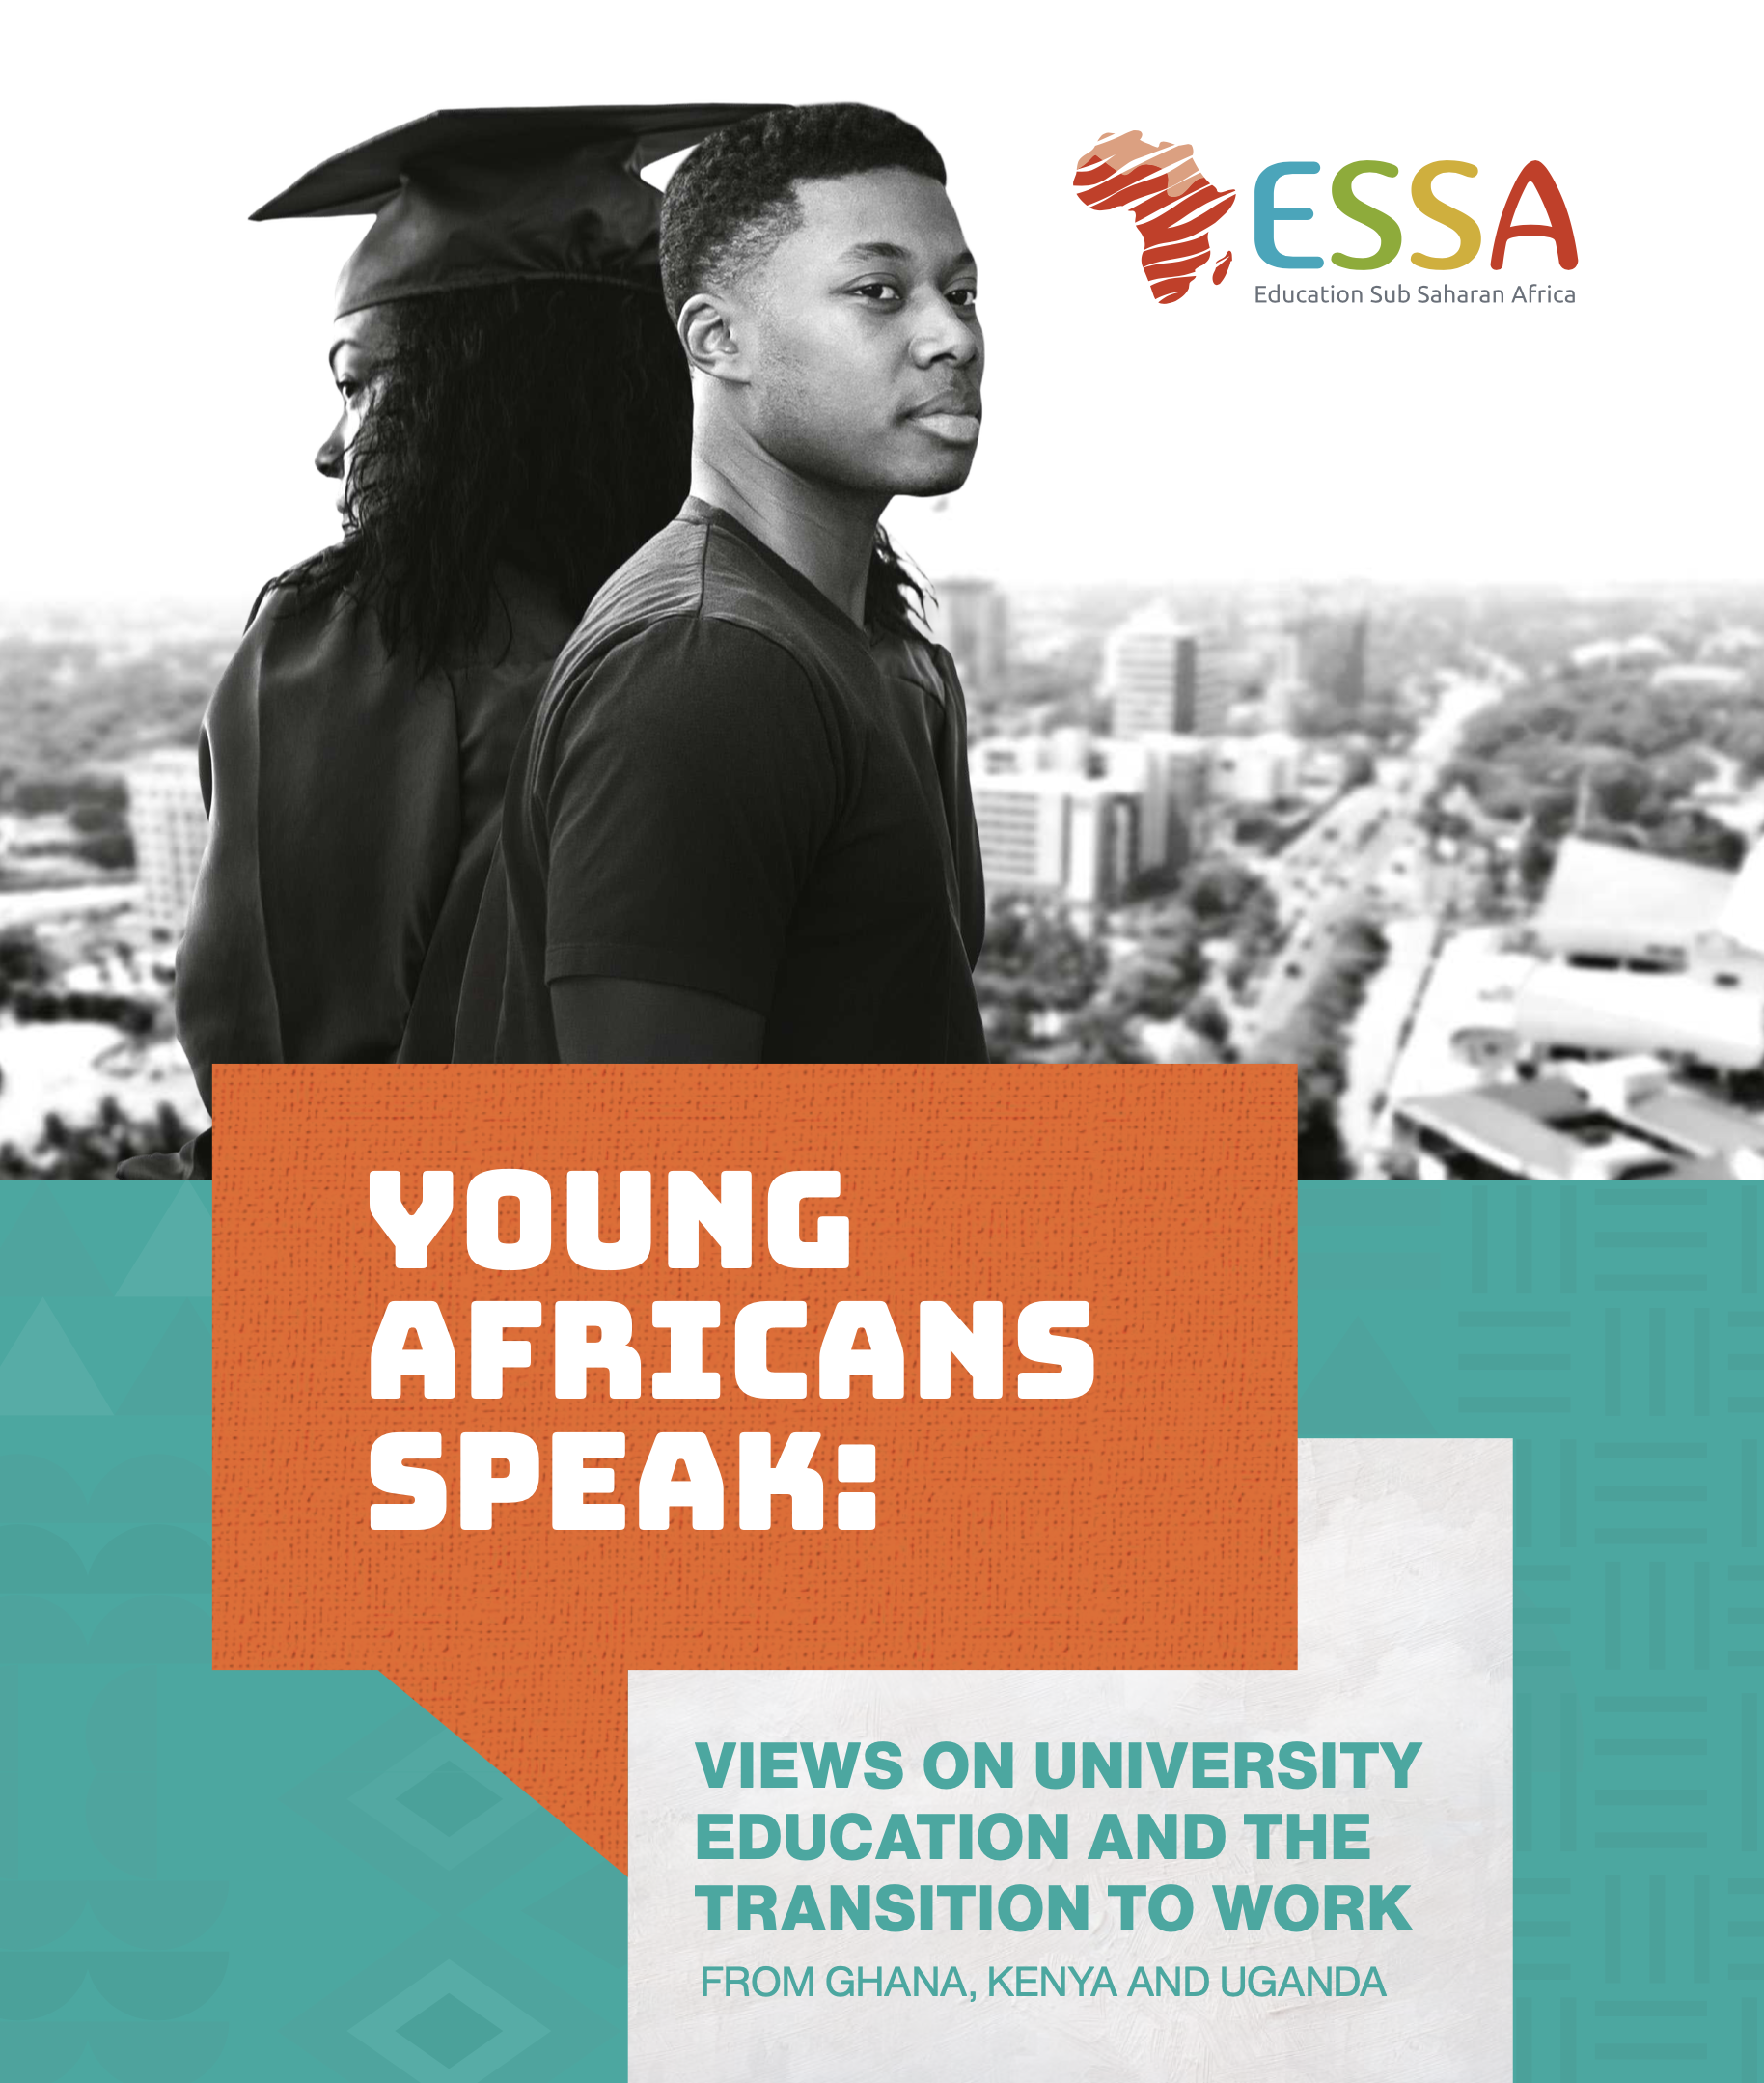 Young Africans Speak: Views on University Education and the Transition to Work from Ghana, Kenya and Uganda